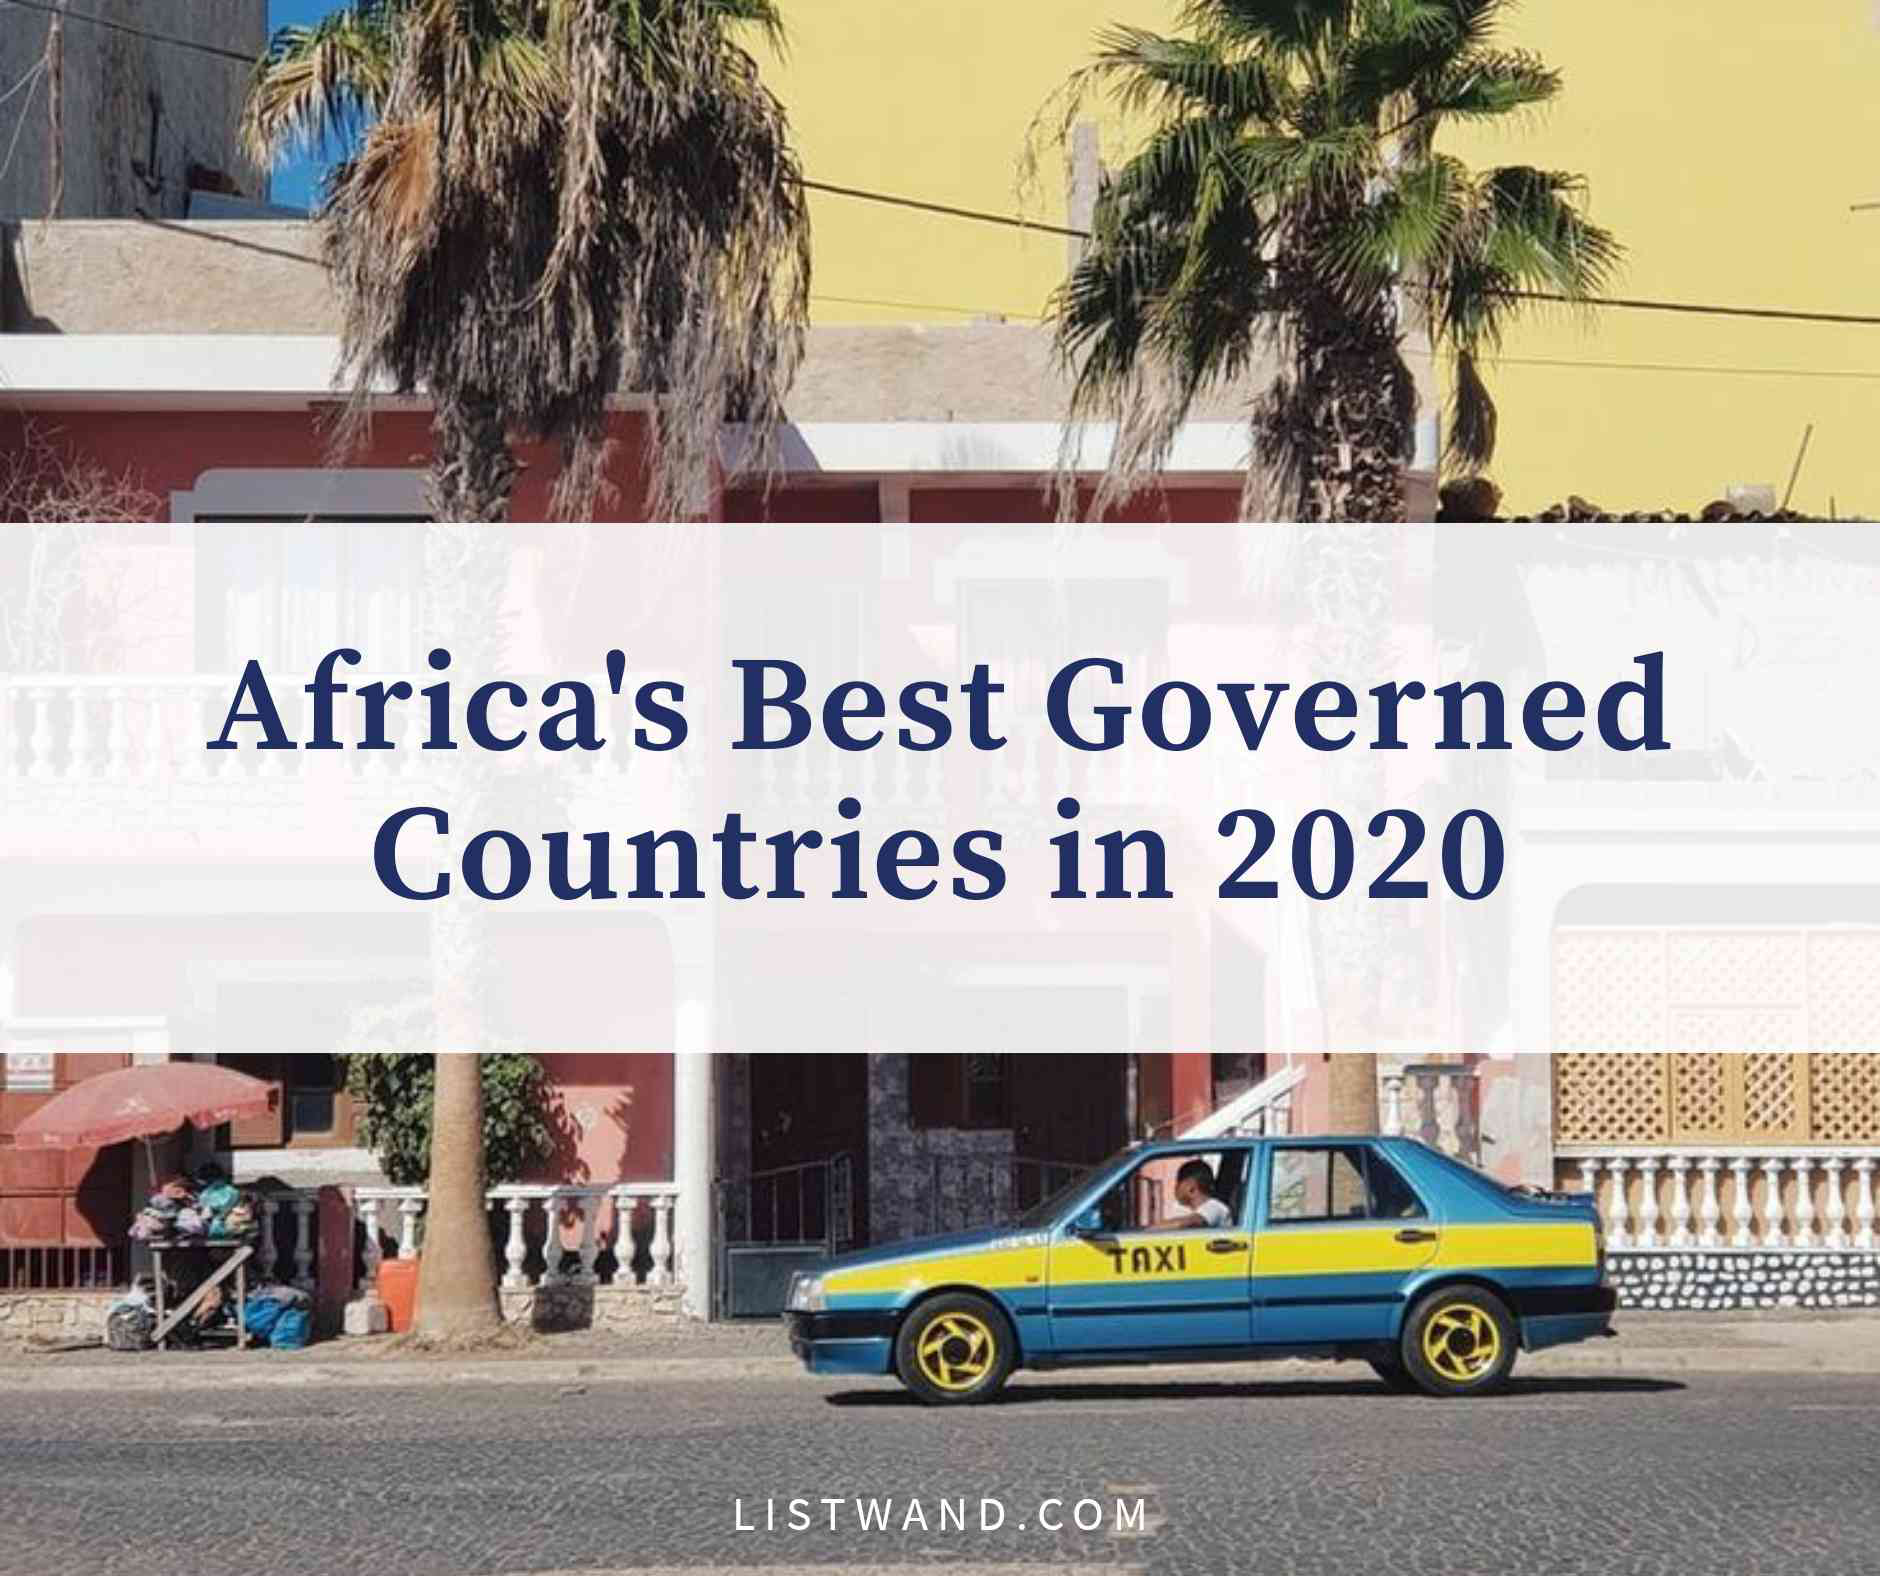 Africa's Best Governed Countries in 2020